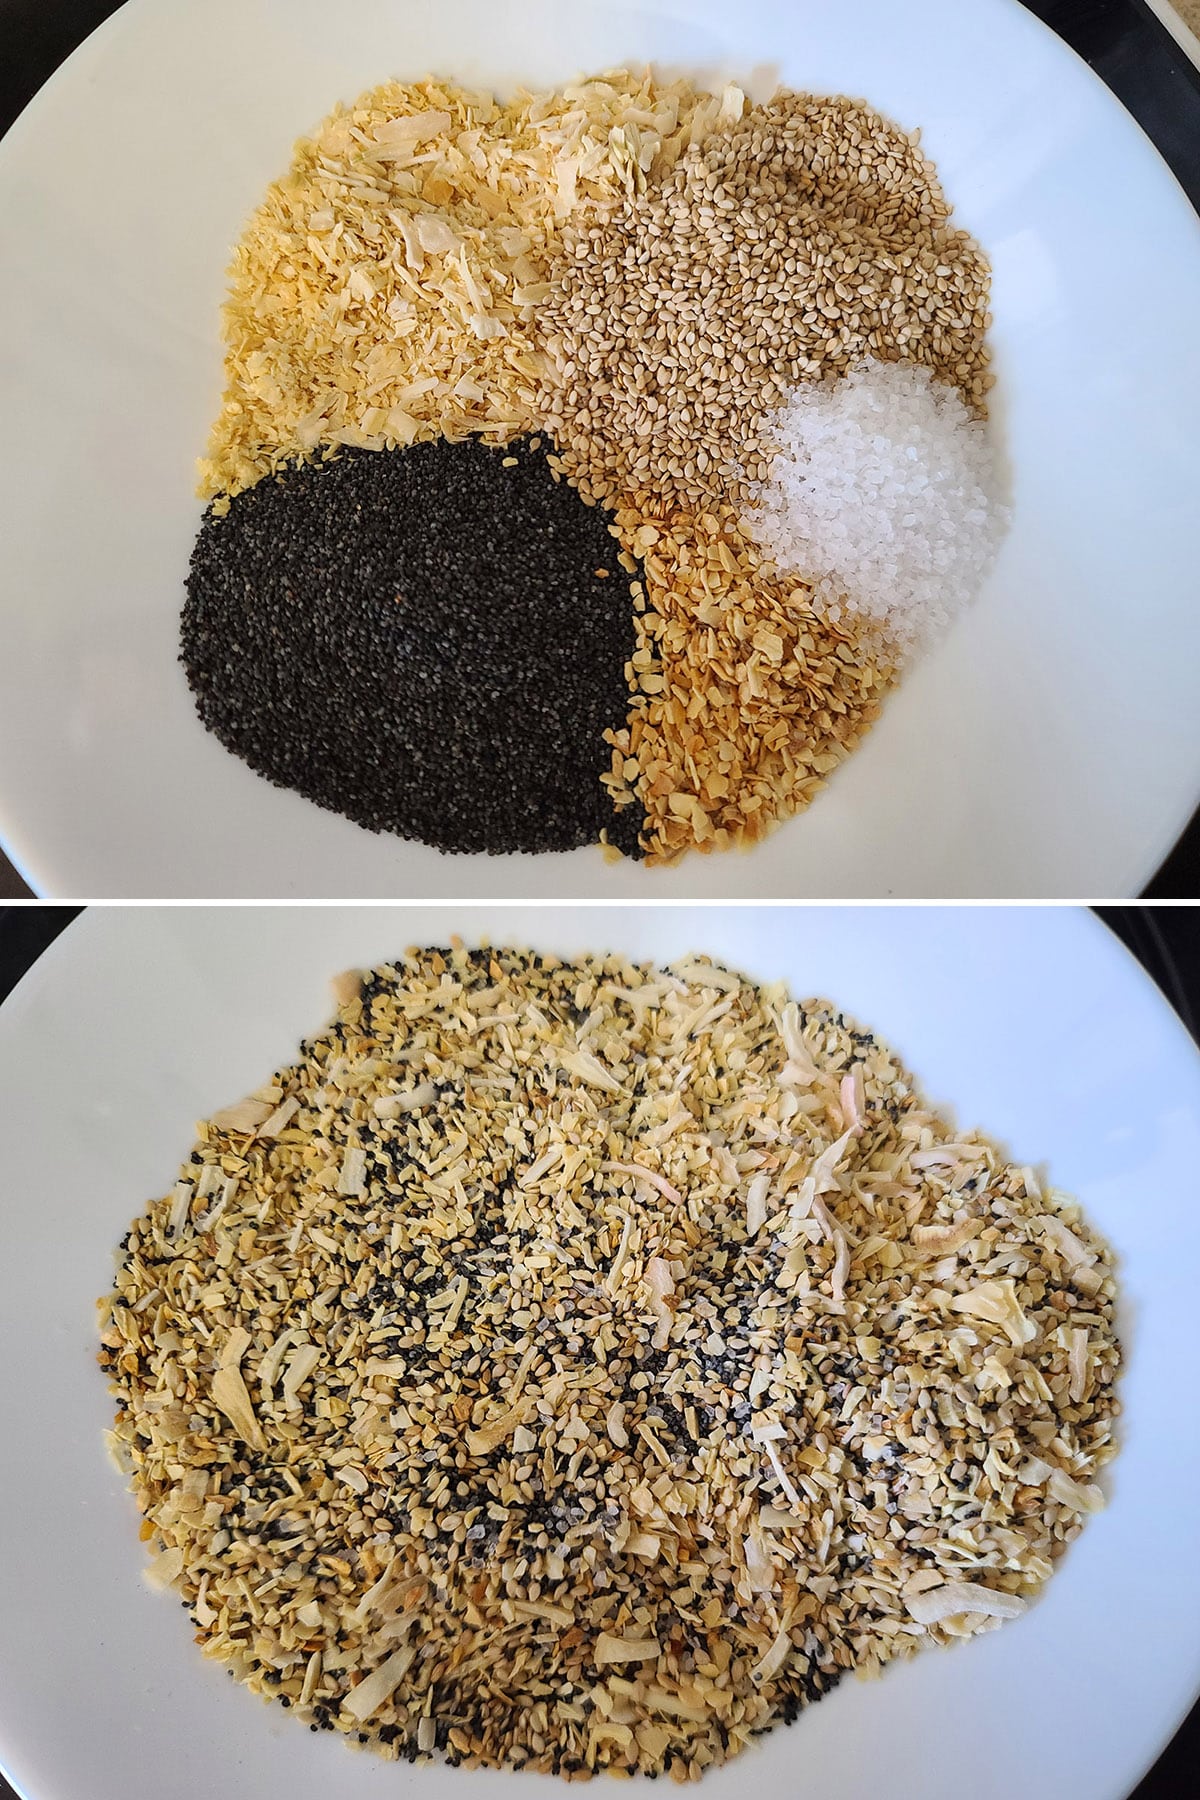 A 2 part image showing the everything seasoning being mixed together.